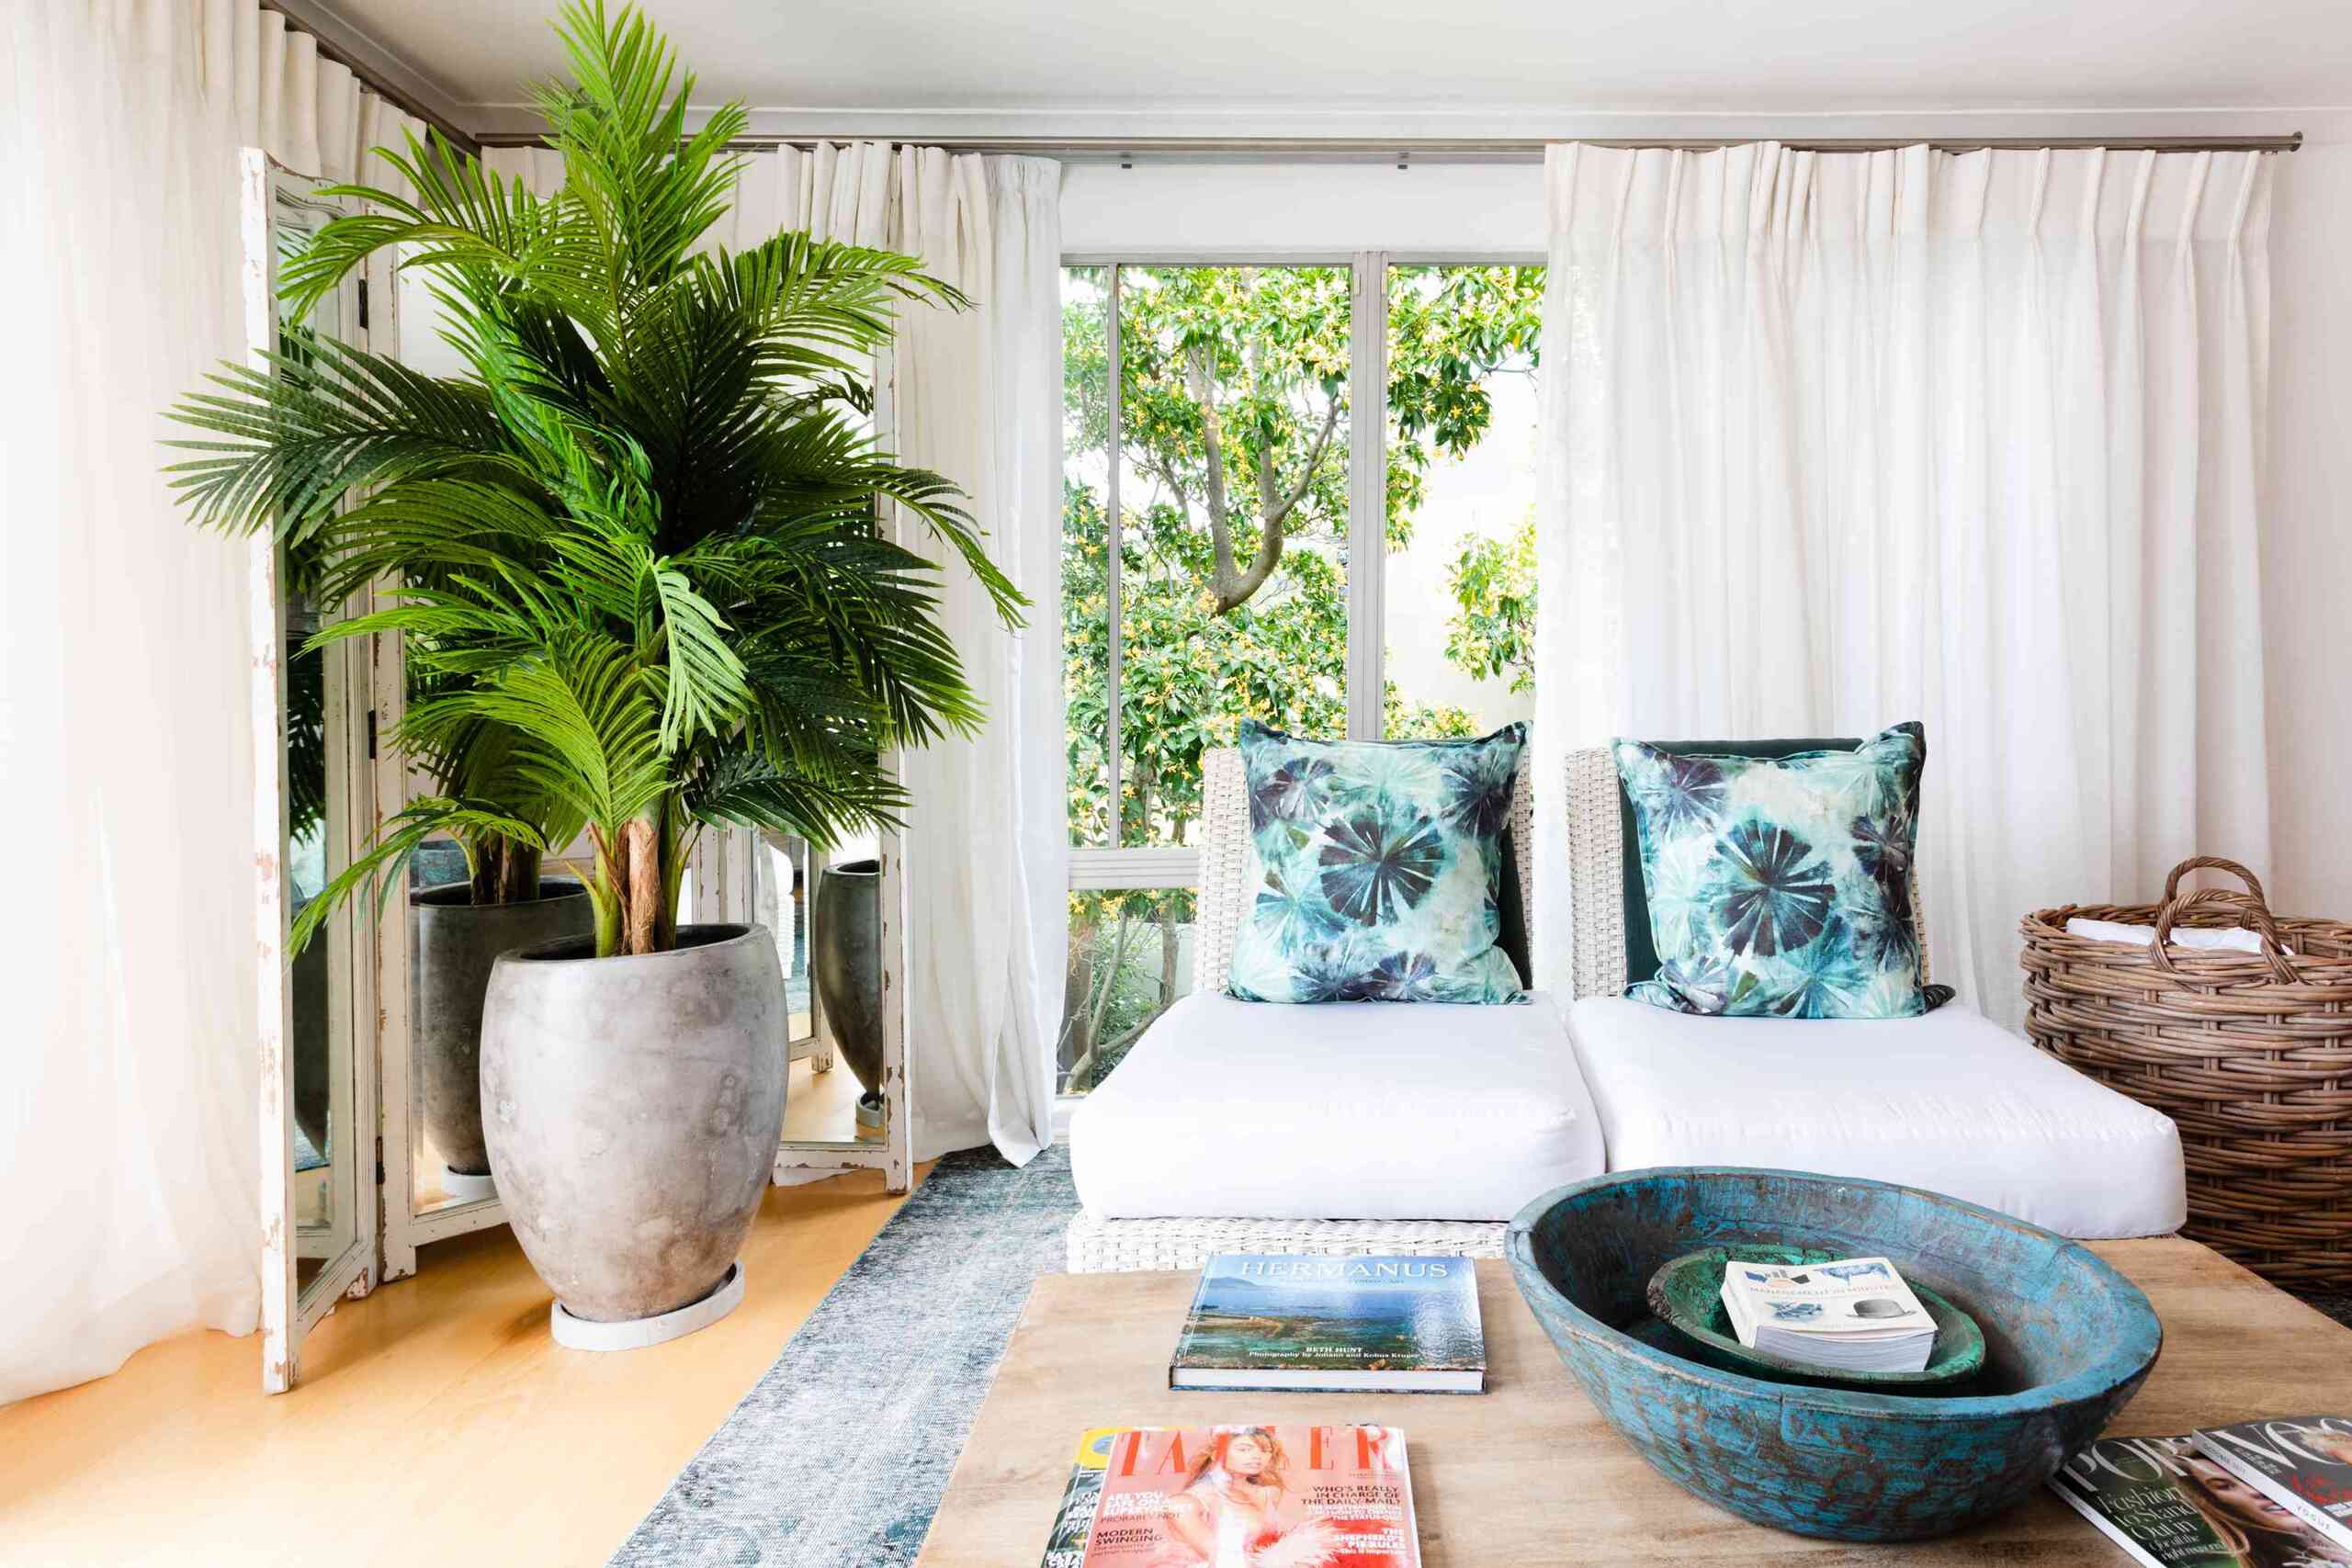 Beach House Decor: 10 Ways To Give Your Home Seaside Style